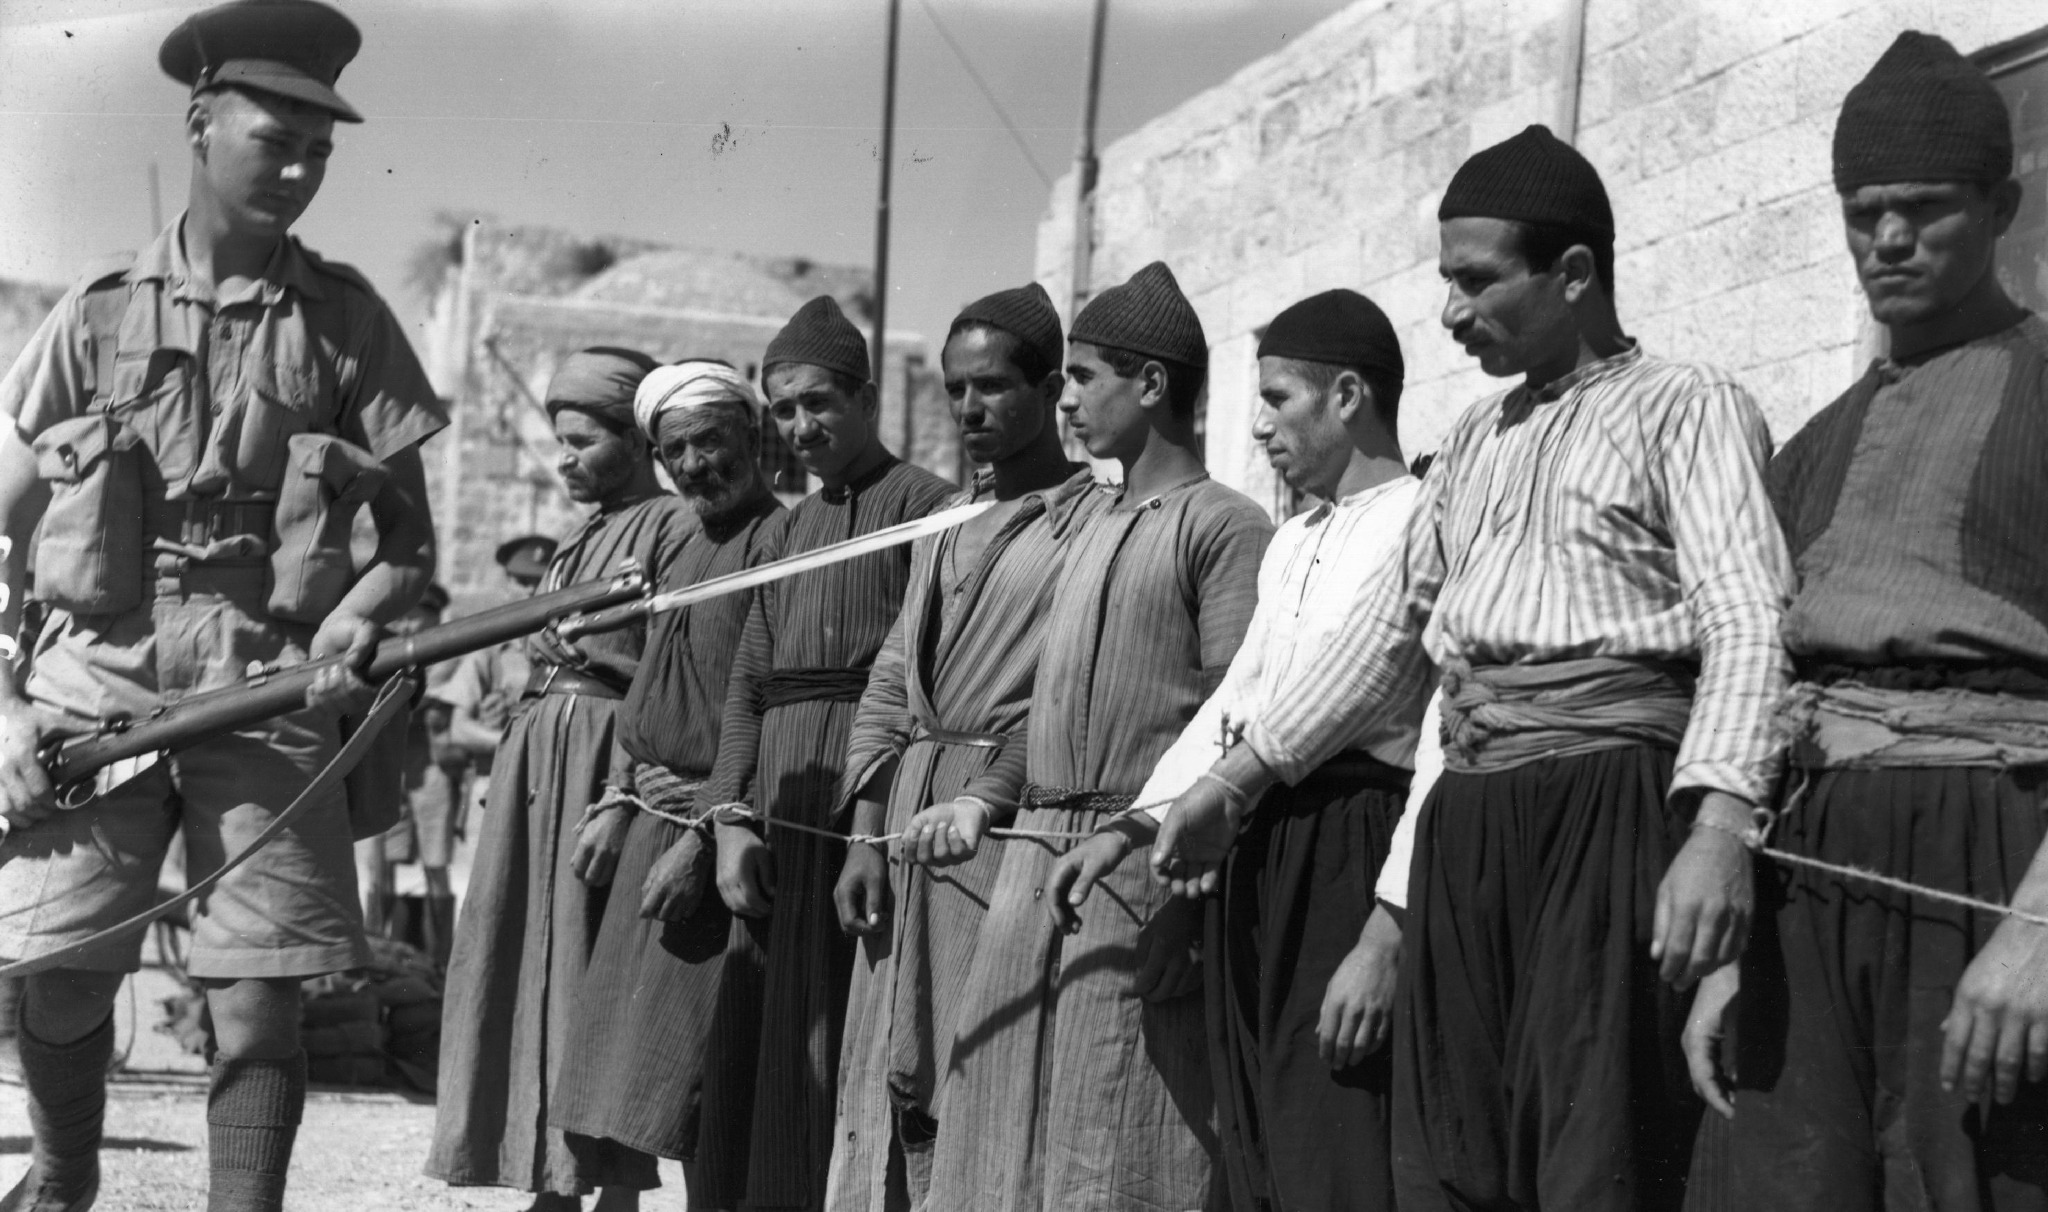 A British soldier guards Palestinian prisoners in Jerusalem, 1938 (Photo: Fox Photos / Getty)